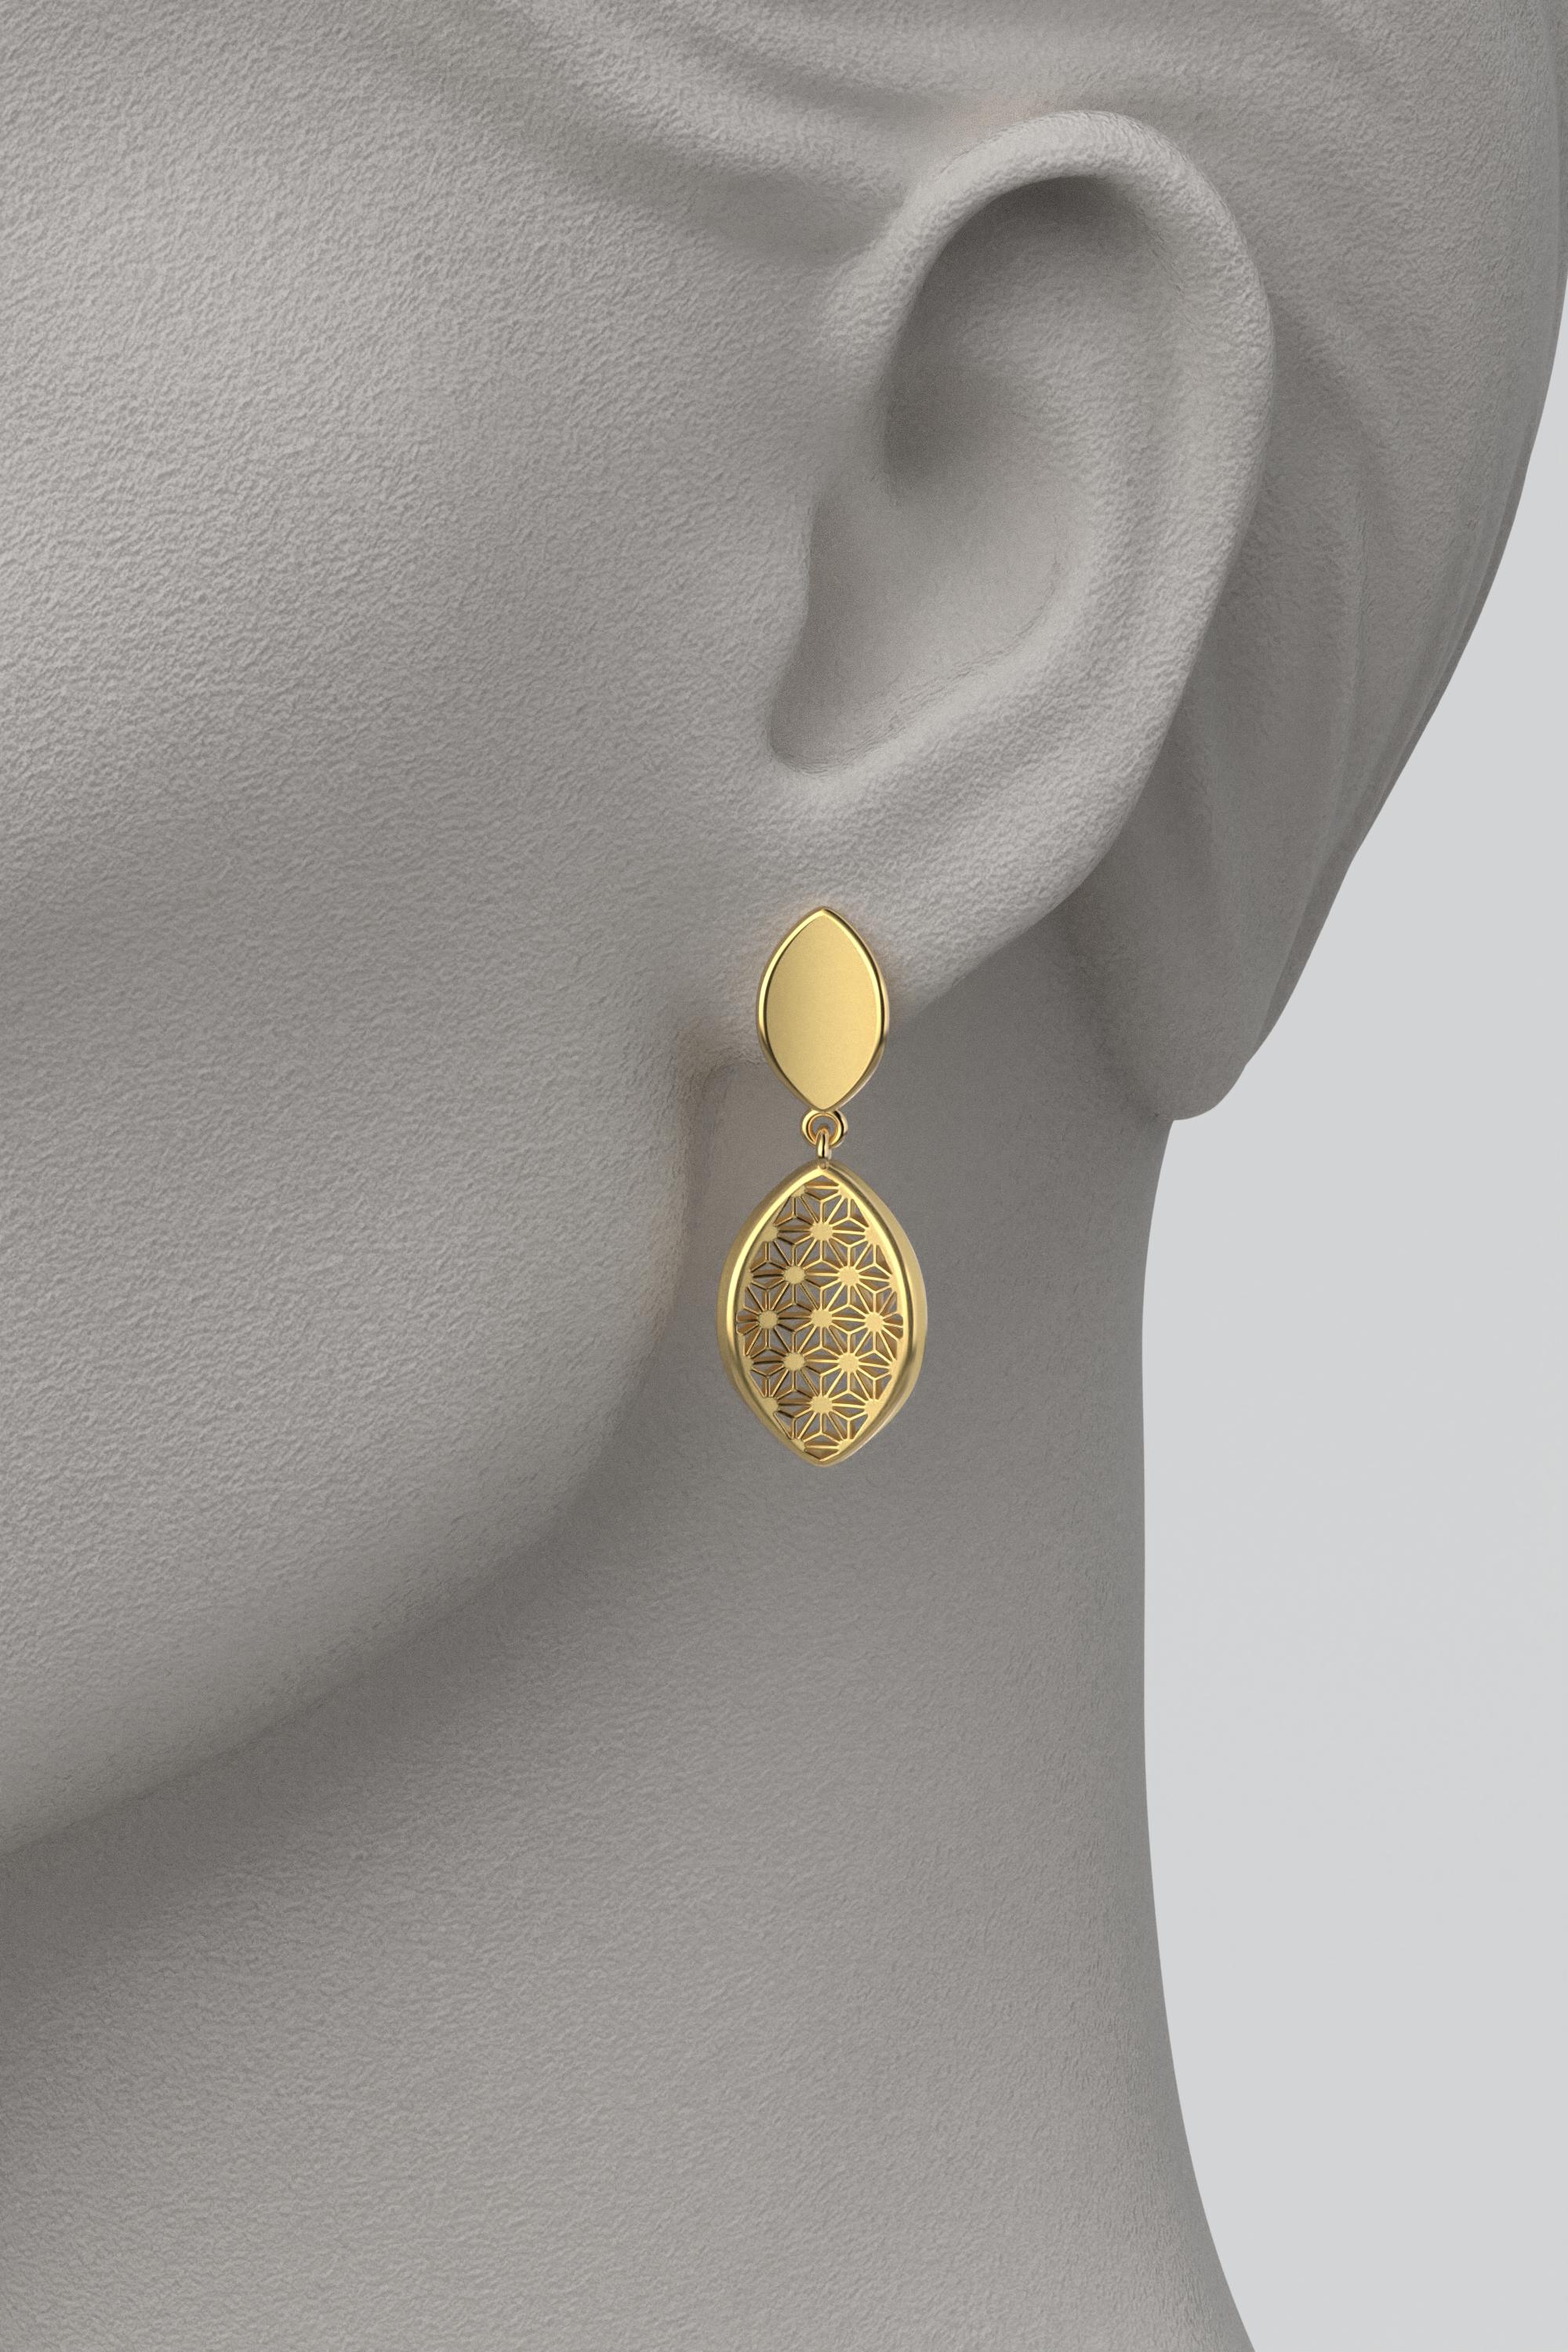 Japanese Sashiko Pattern Earrings Made in Italy in 14k Gold  Oltremare Gioielli For Sale 1